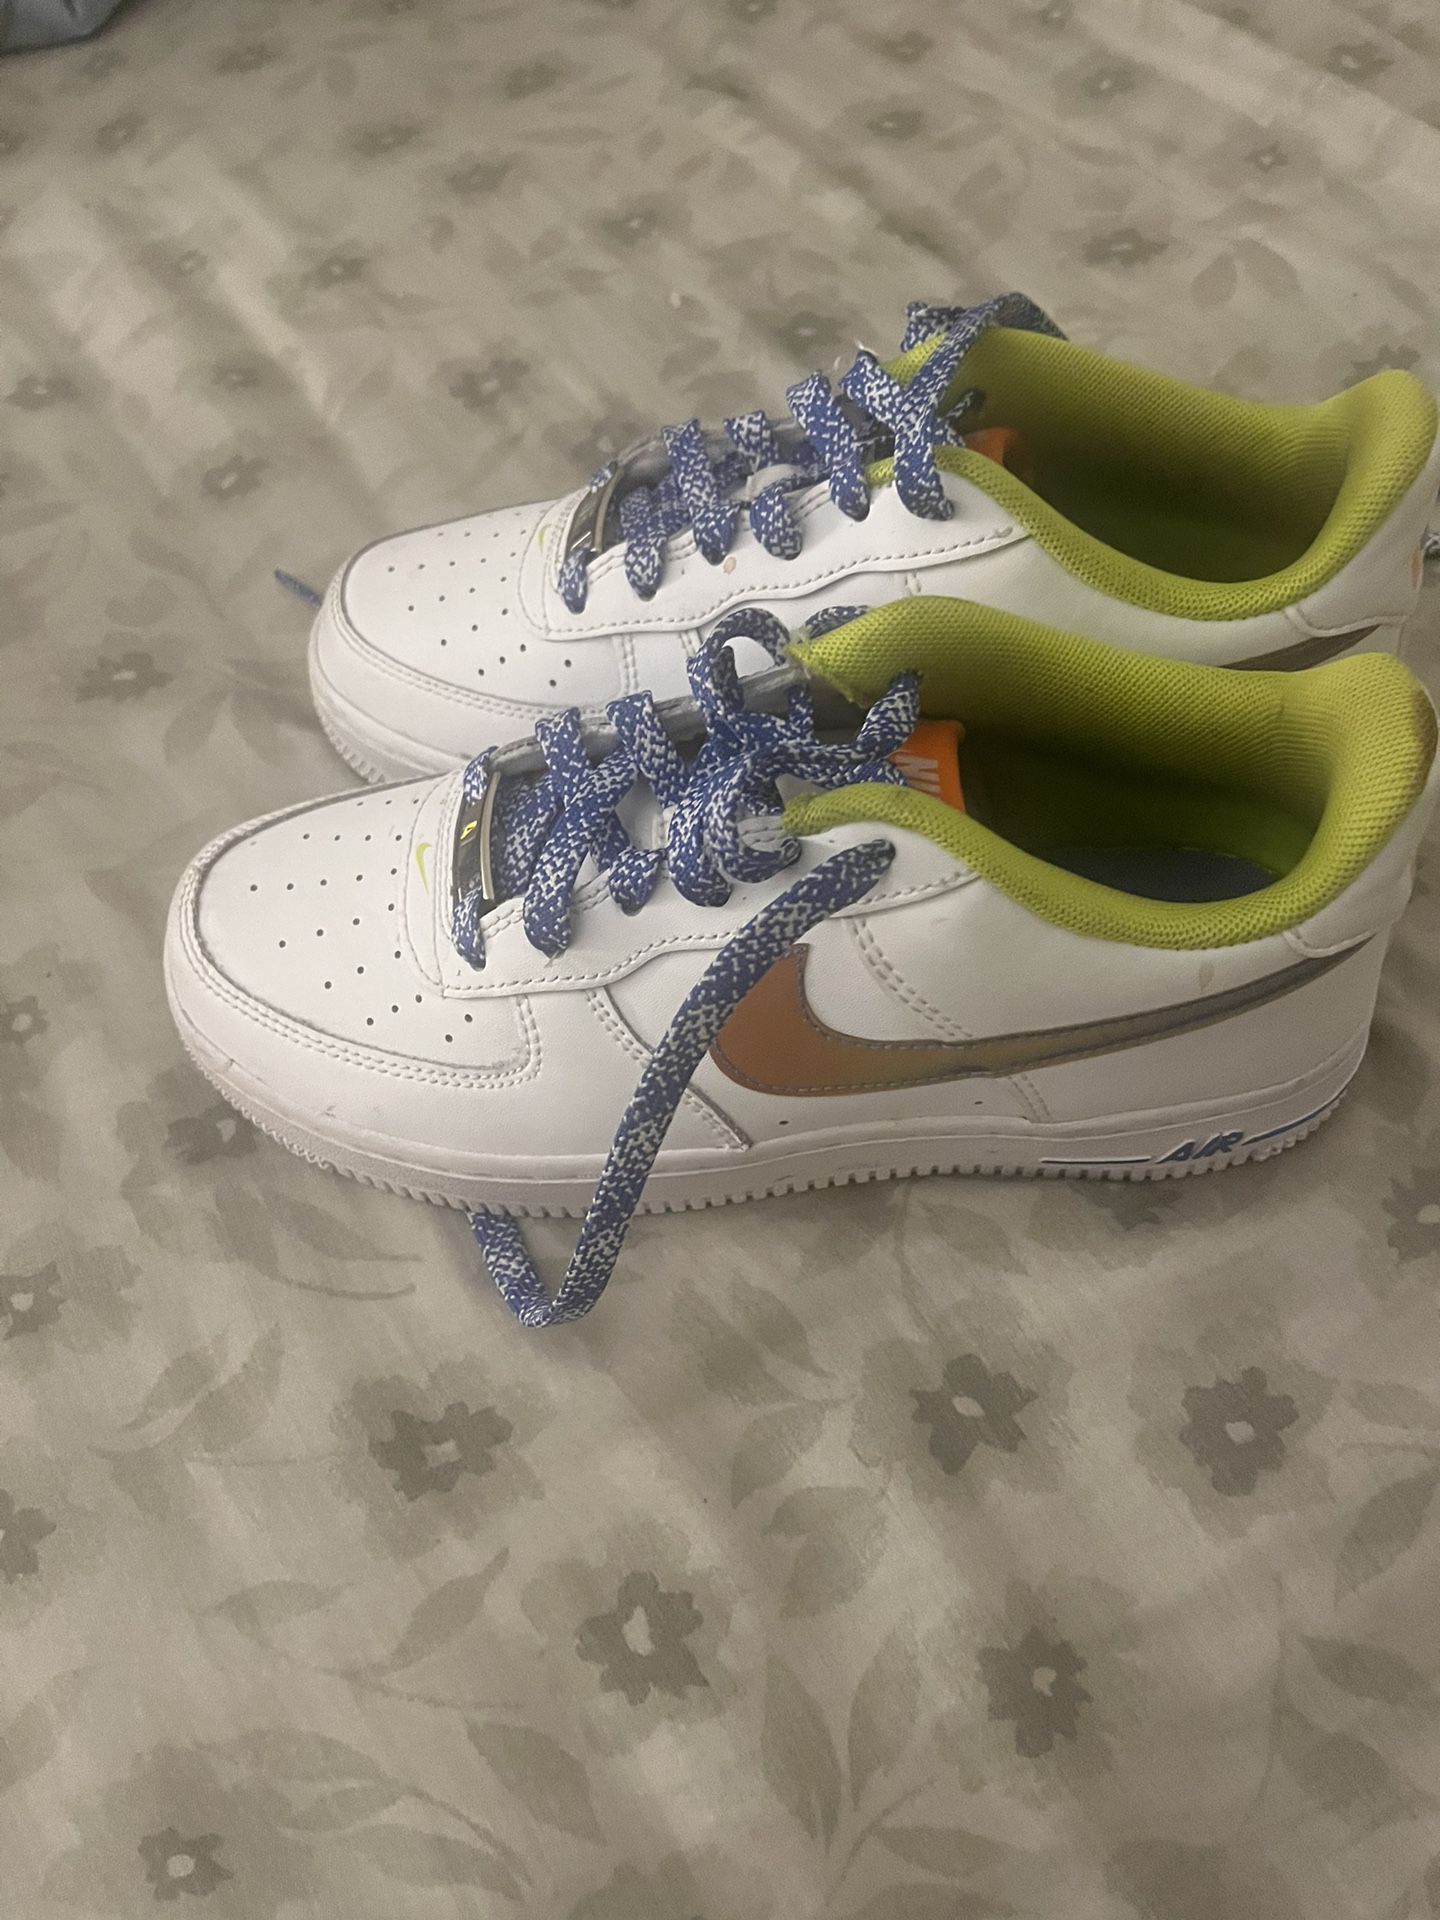 Air Force 1s LV8 Size 4 boys